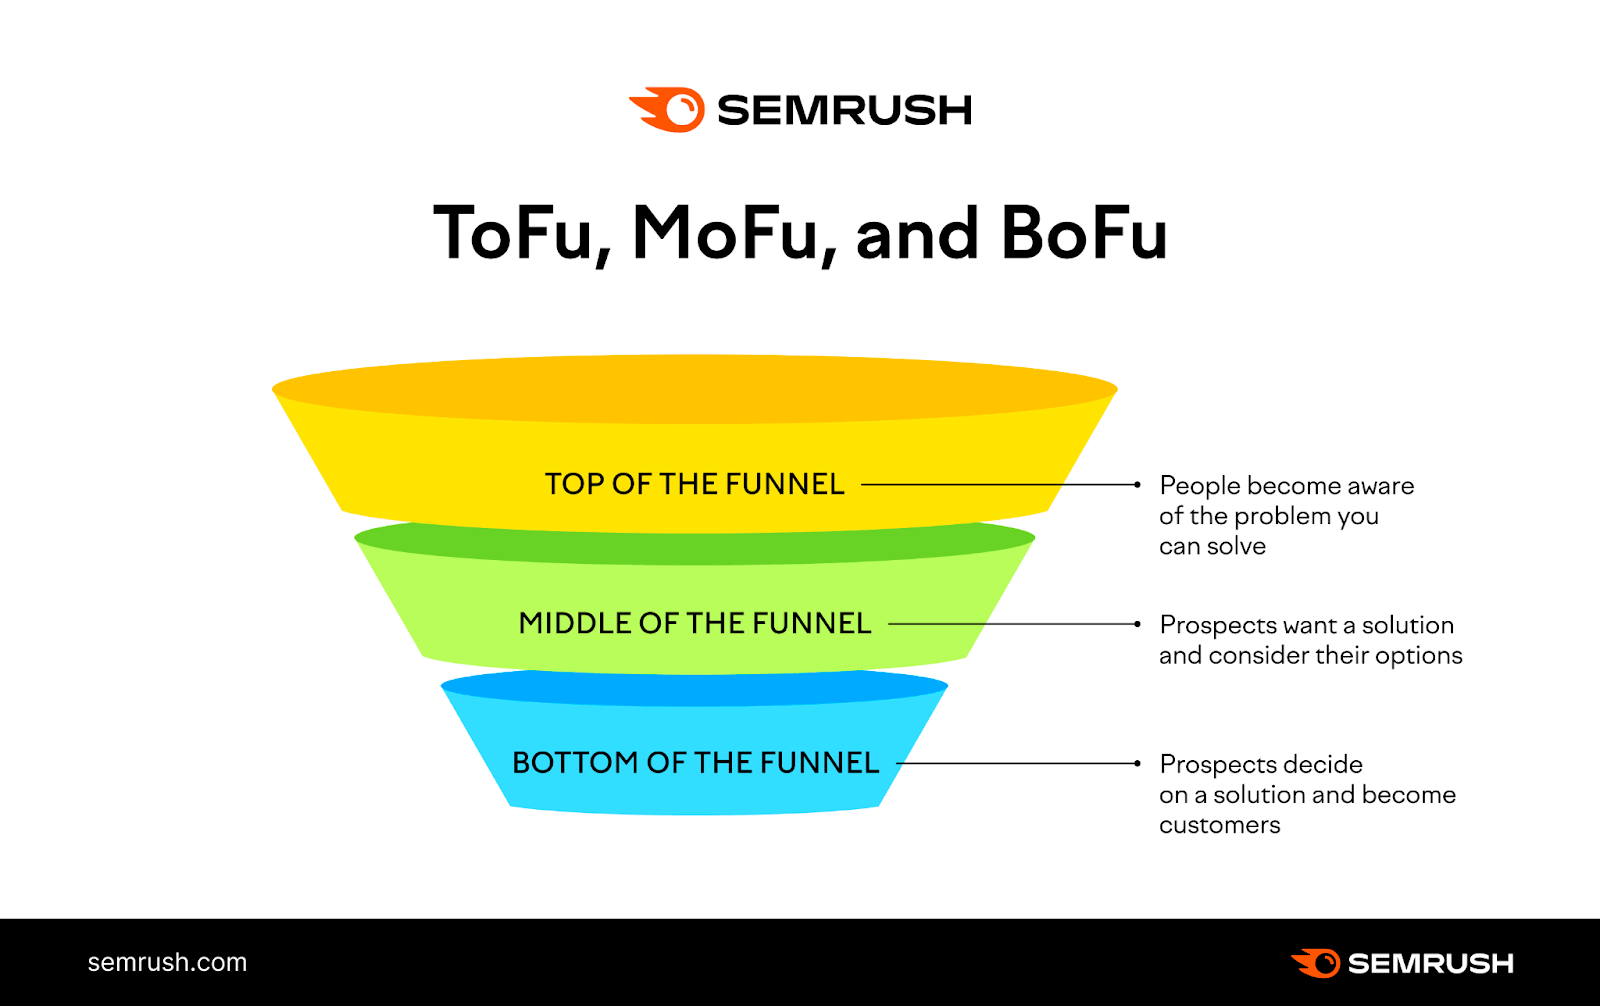 Marketing funnel, explaining the top, middle and bottom of the funnel